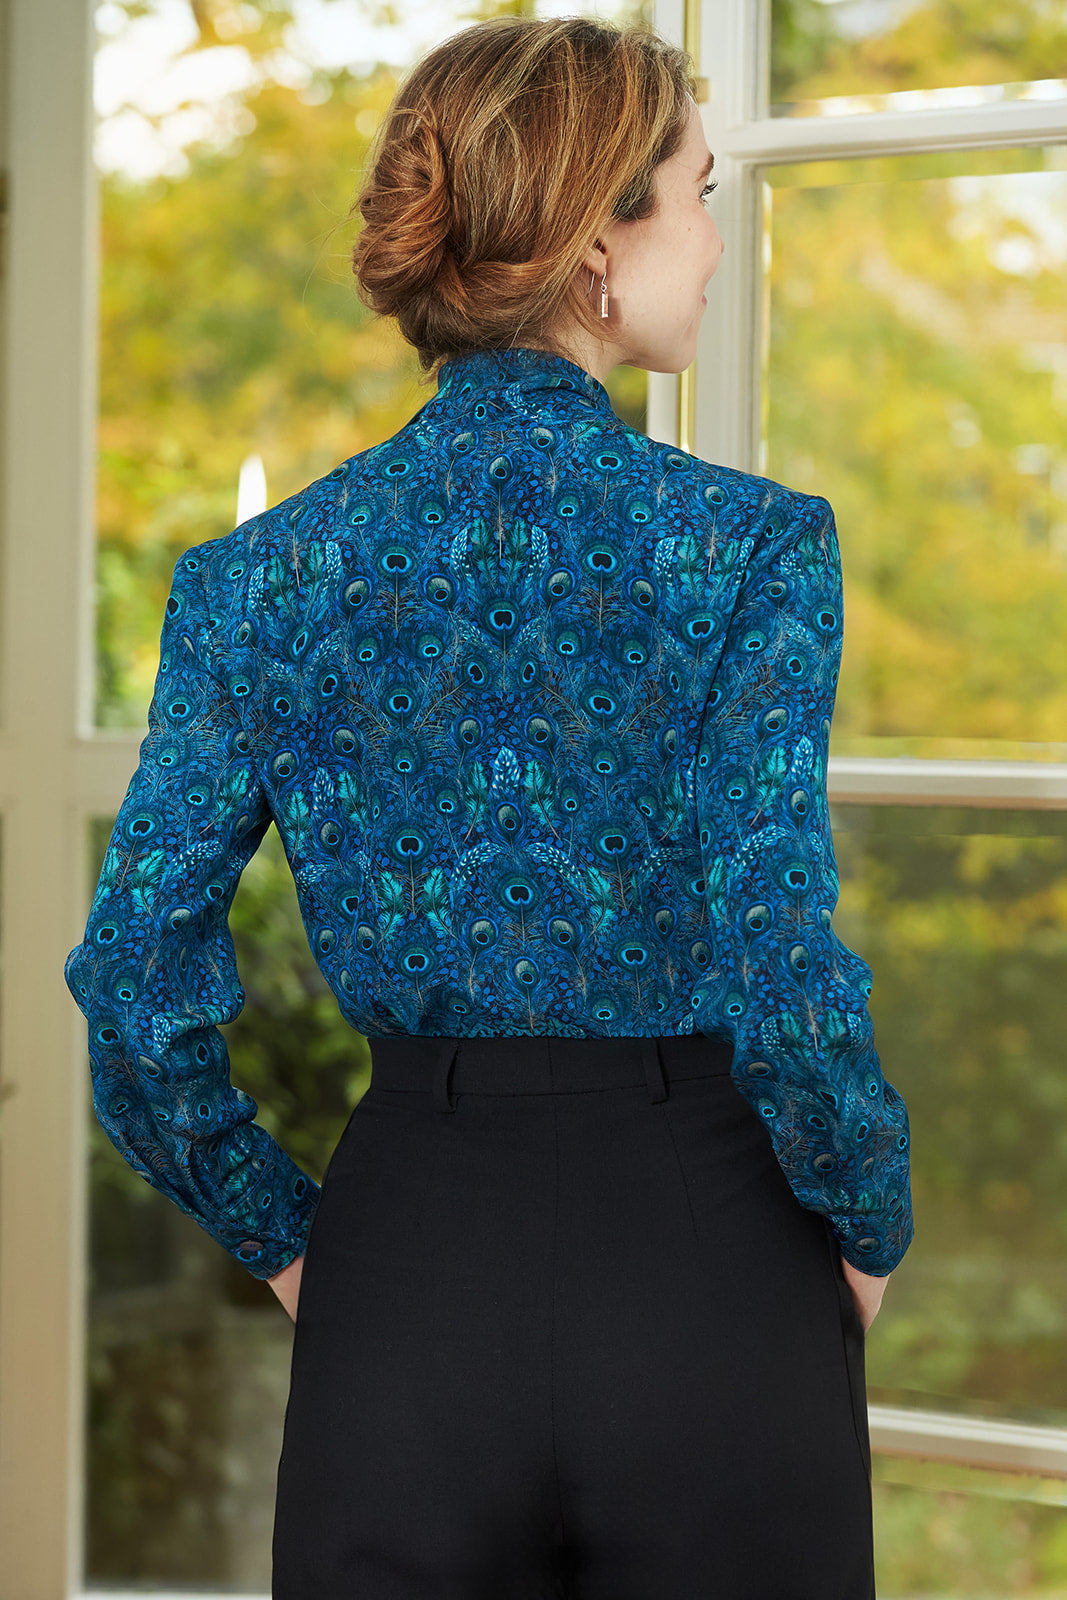 Teal Tie-neck Blouse